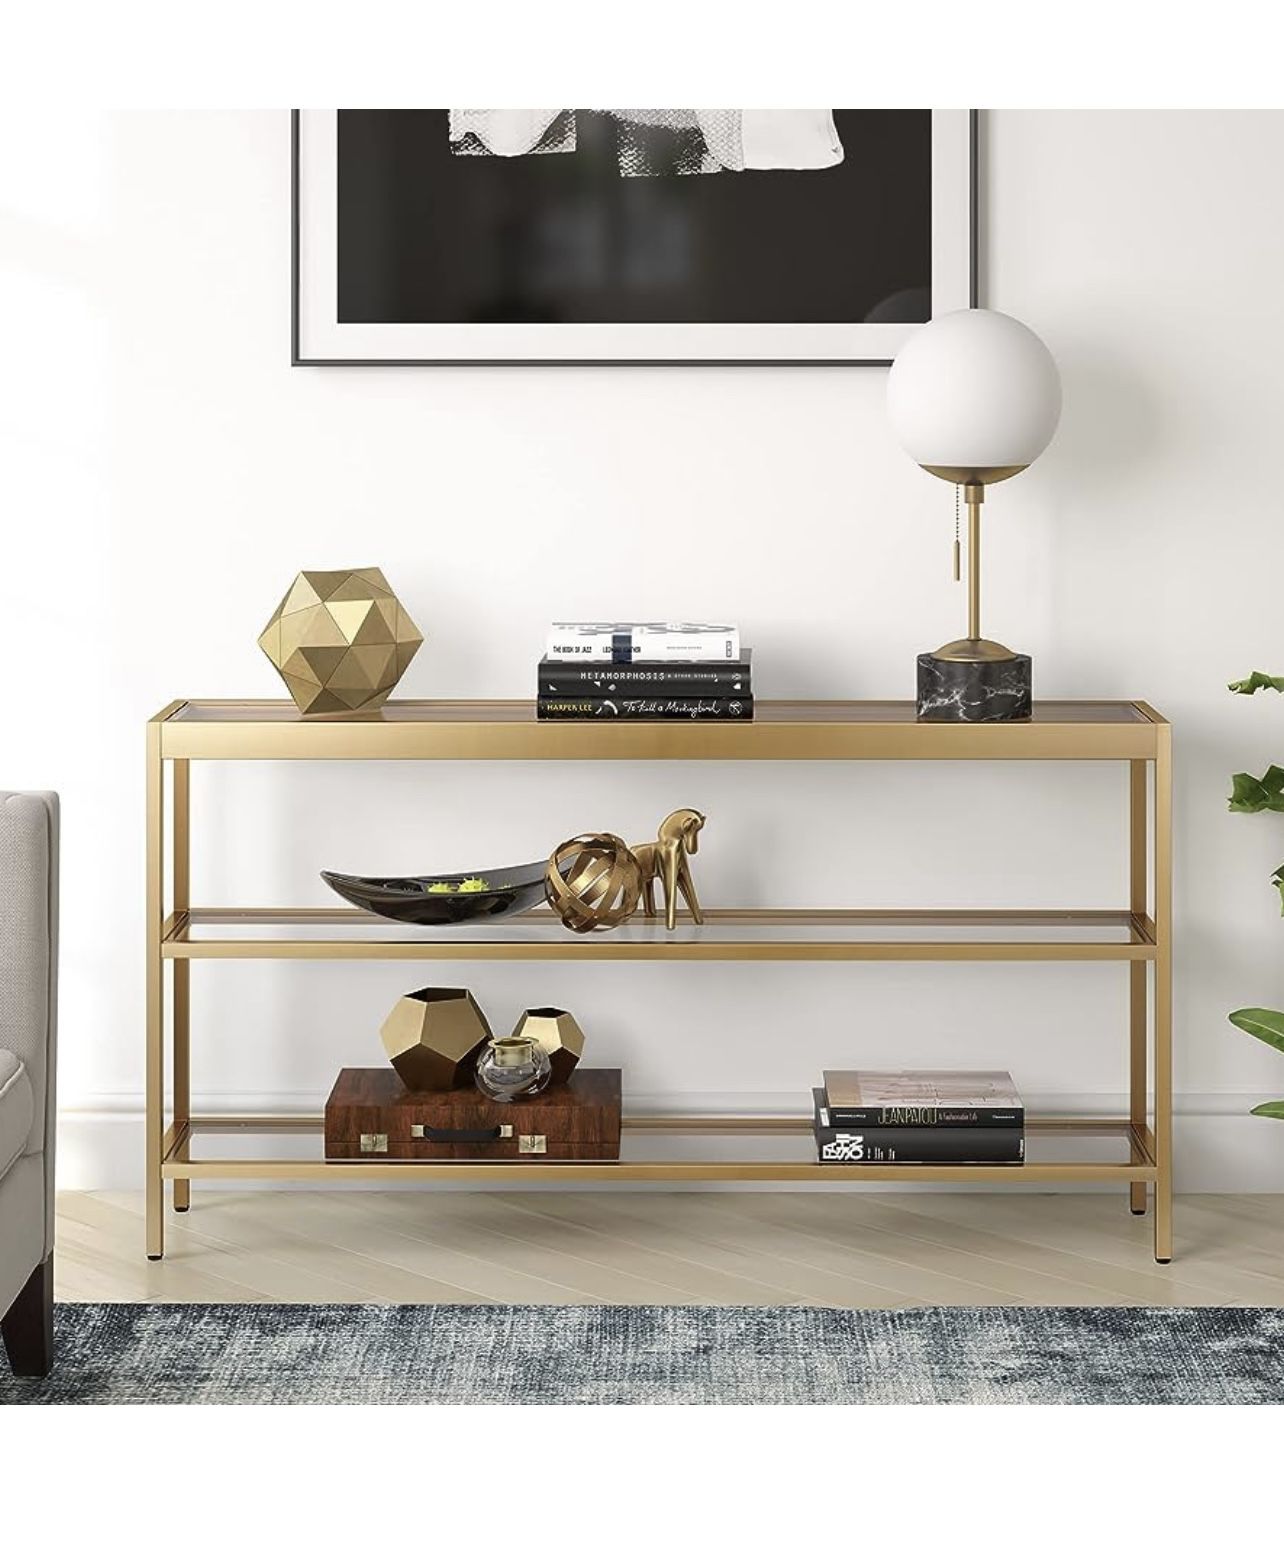 55" Wide Rectangular Console Table in Brass, Entryway Table, Accent Table for Living Room, Hallway